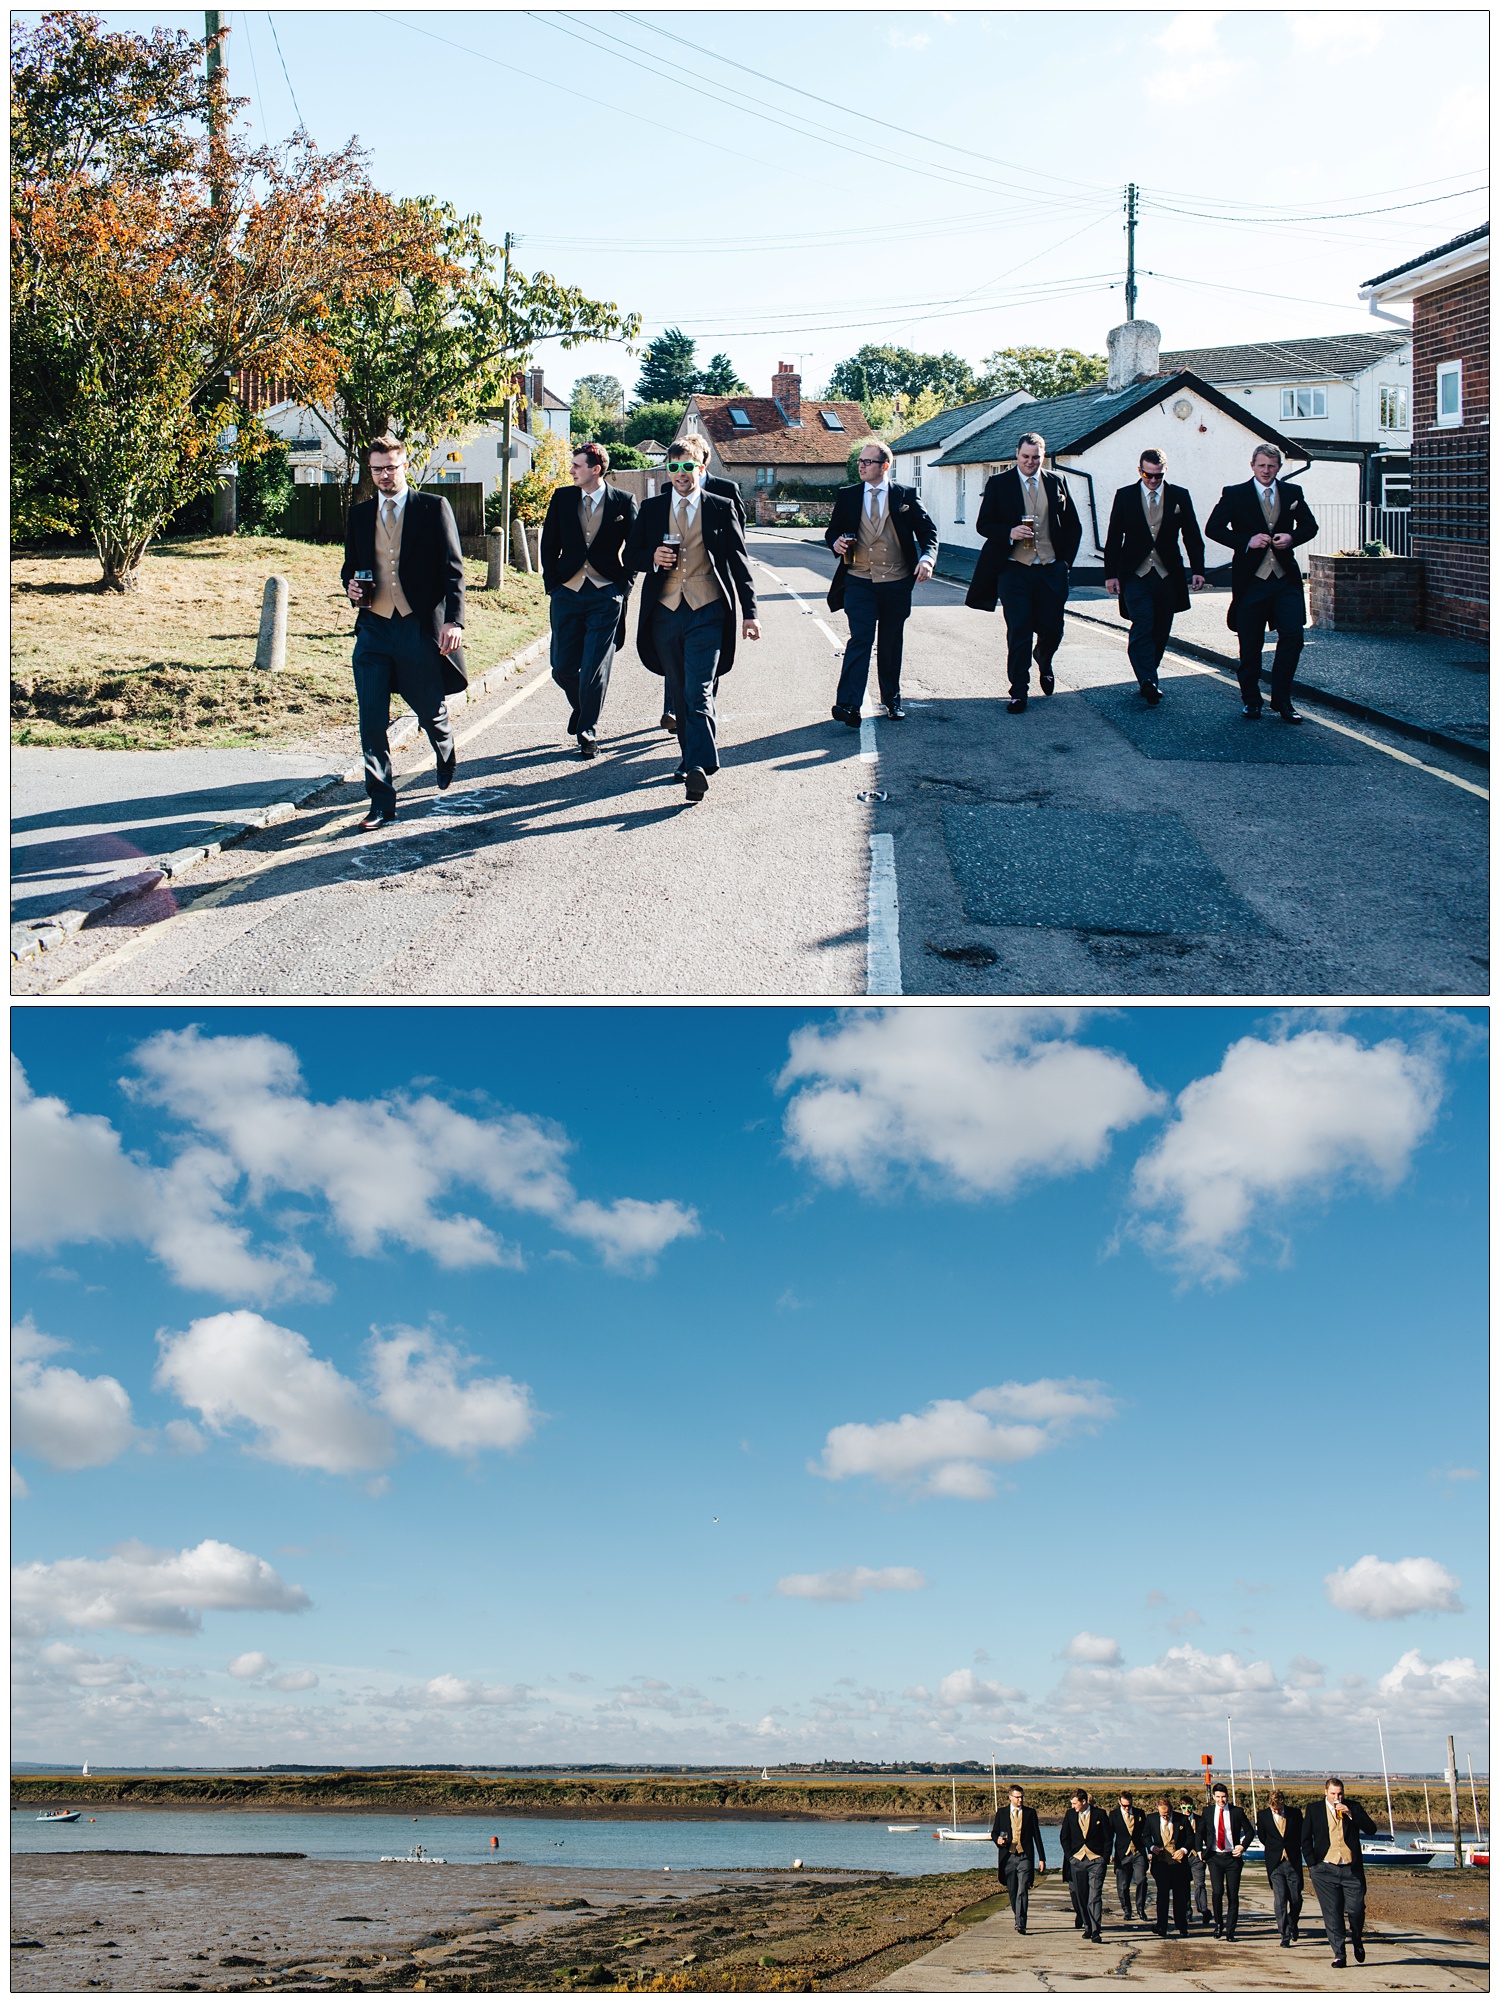 Groomsmen walking down Waterside Road in Bradwell-on-Sea. They are holding pints of beer and some are wearing sunglasses. They are all in morning suits with beige waistcoats and ties. Men walking by the river Blackwater in morning suits/